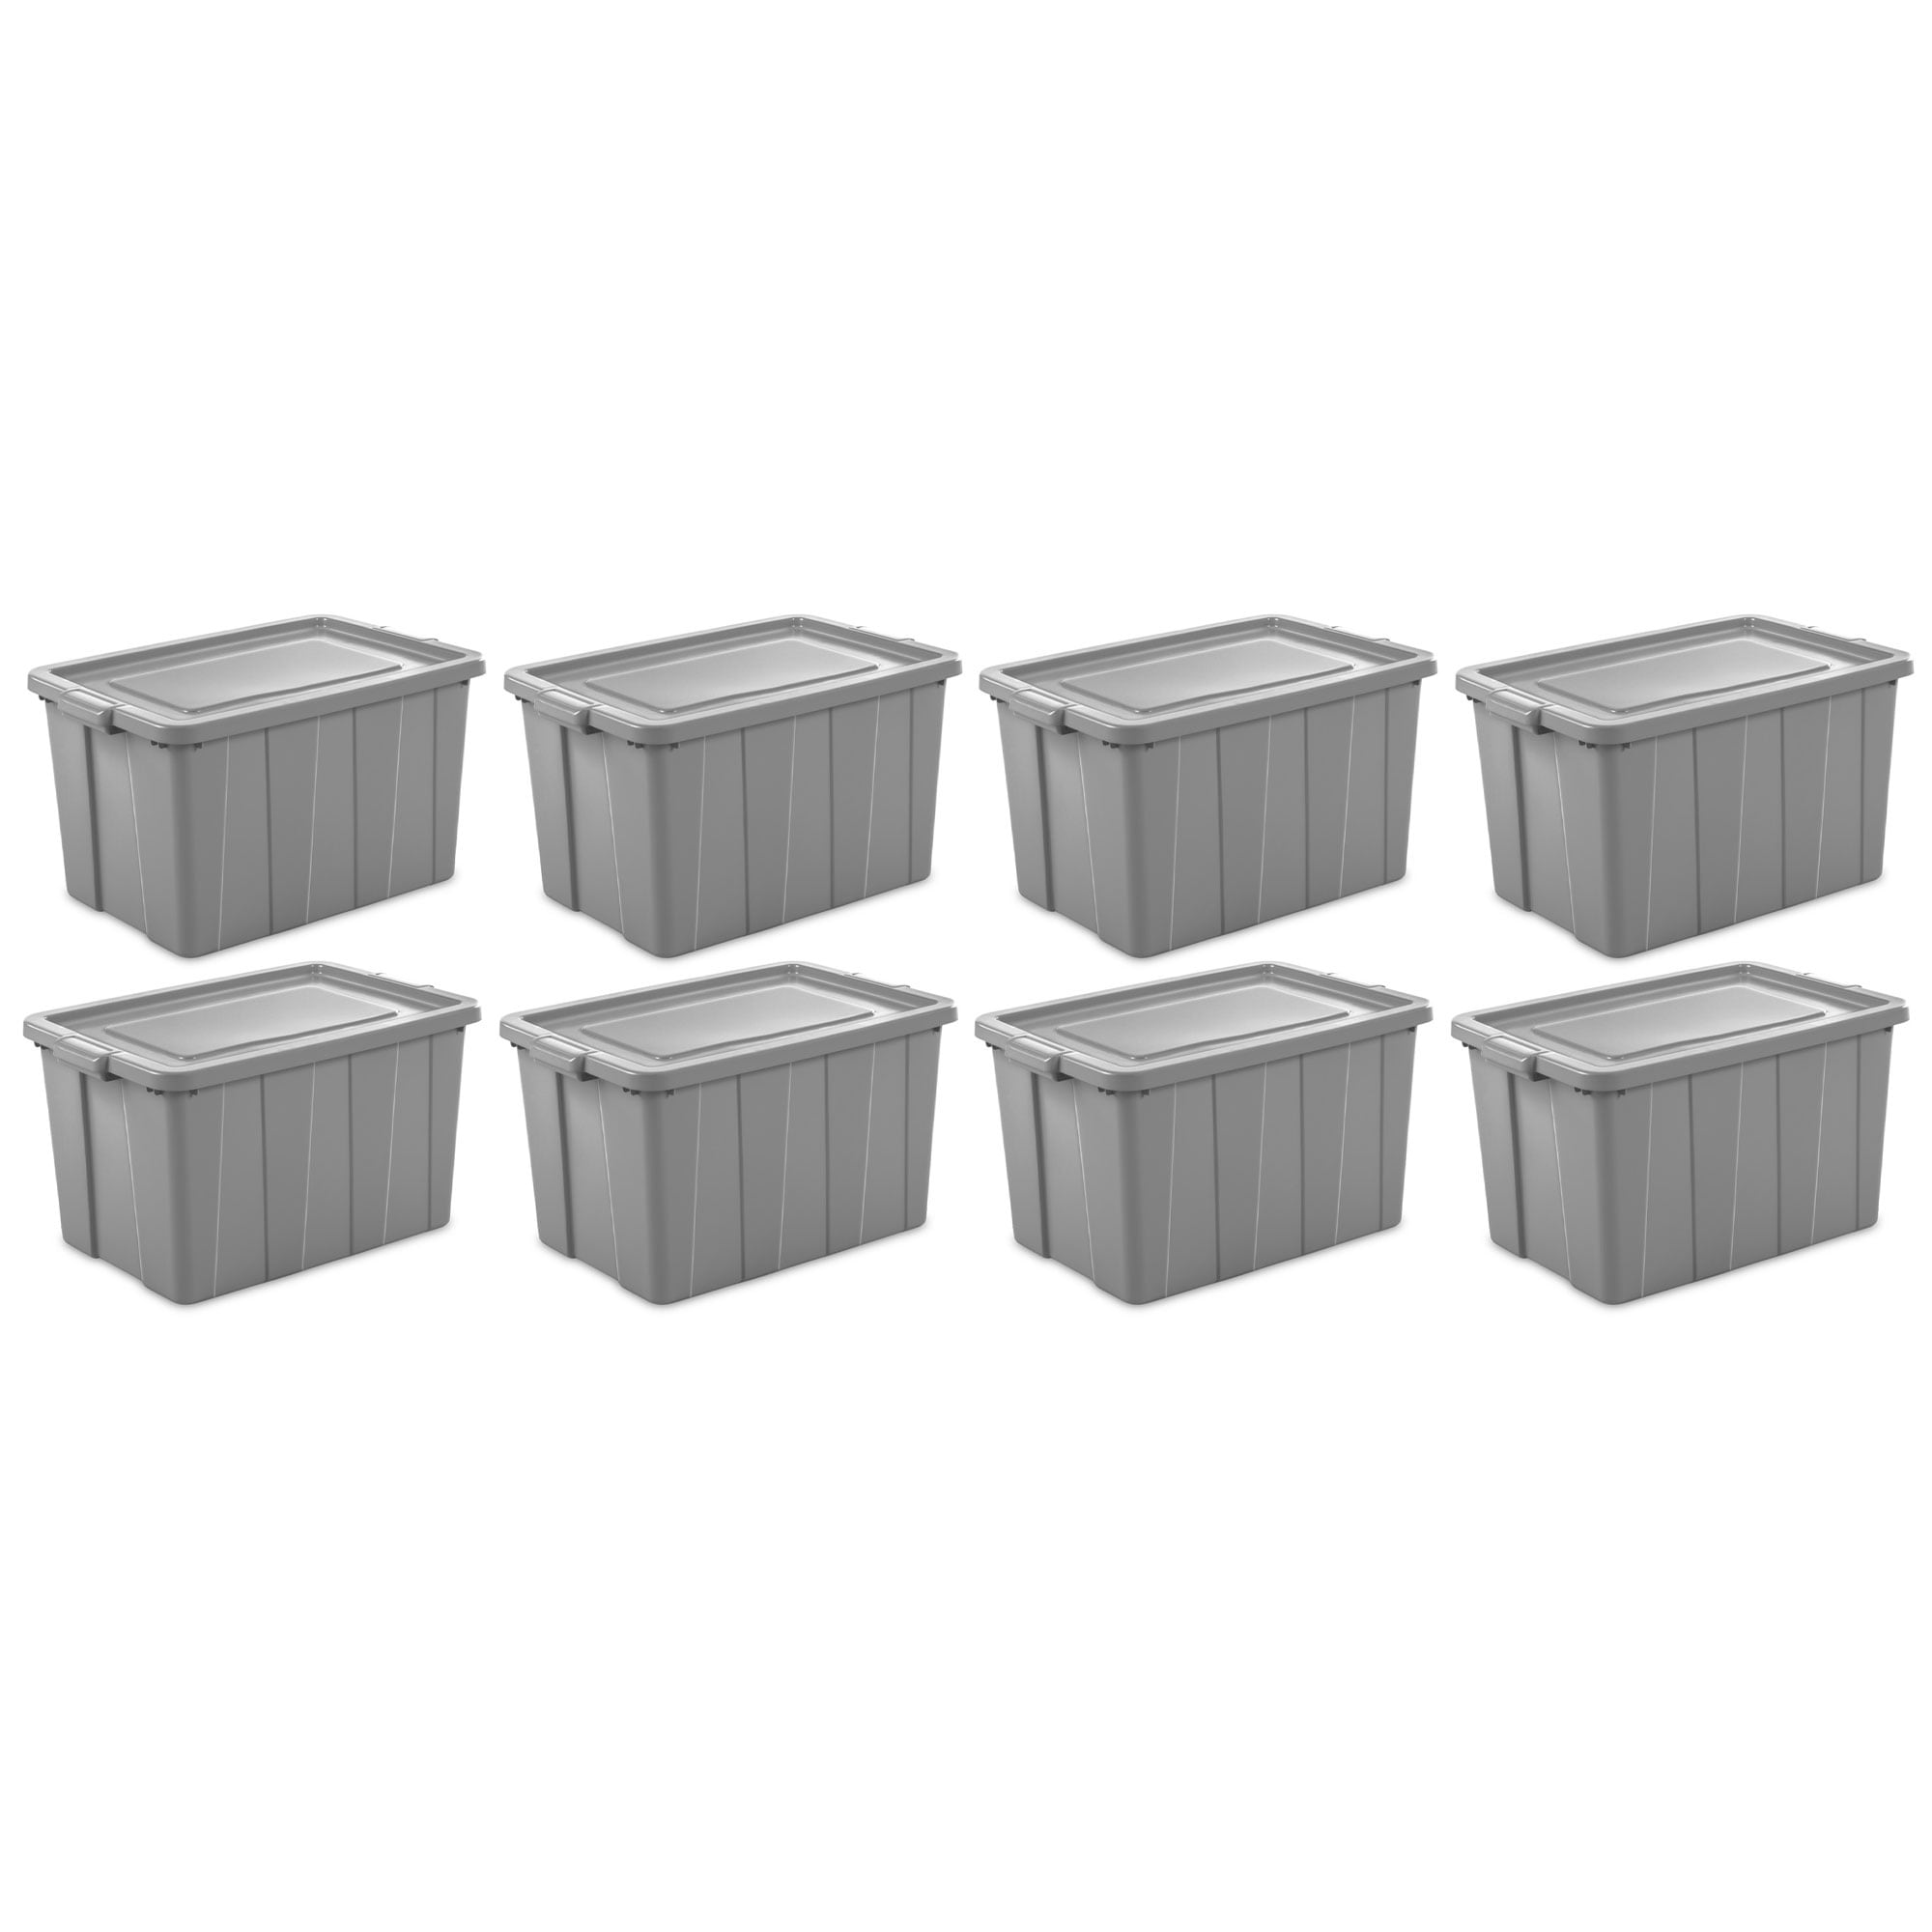 https://ak1.ostkcdn.com/images/products/is/images/direct/d12e5f61552d4a4347a3e7adb5abf020f739b555/Sterilite-Tuff1-30-Gallon-Plastic-Storage-Tote-Container-Bin-with-Lid-%288-Pack%29.jpg